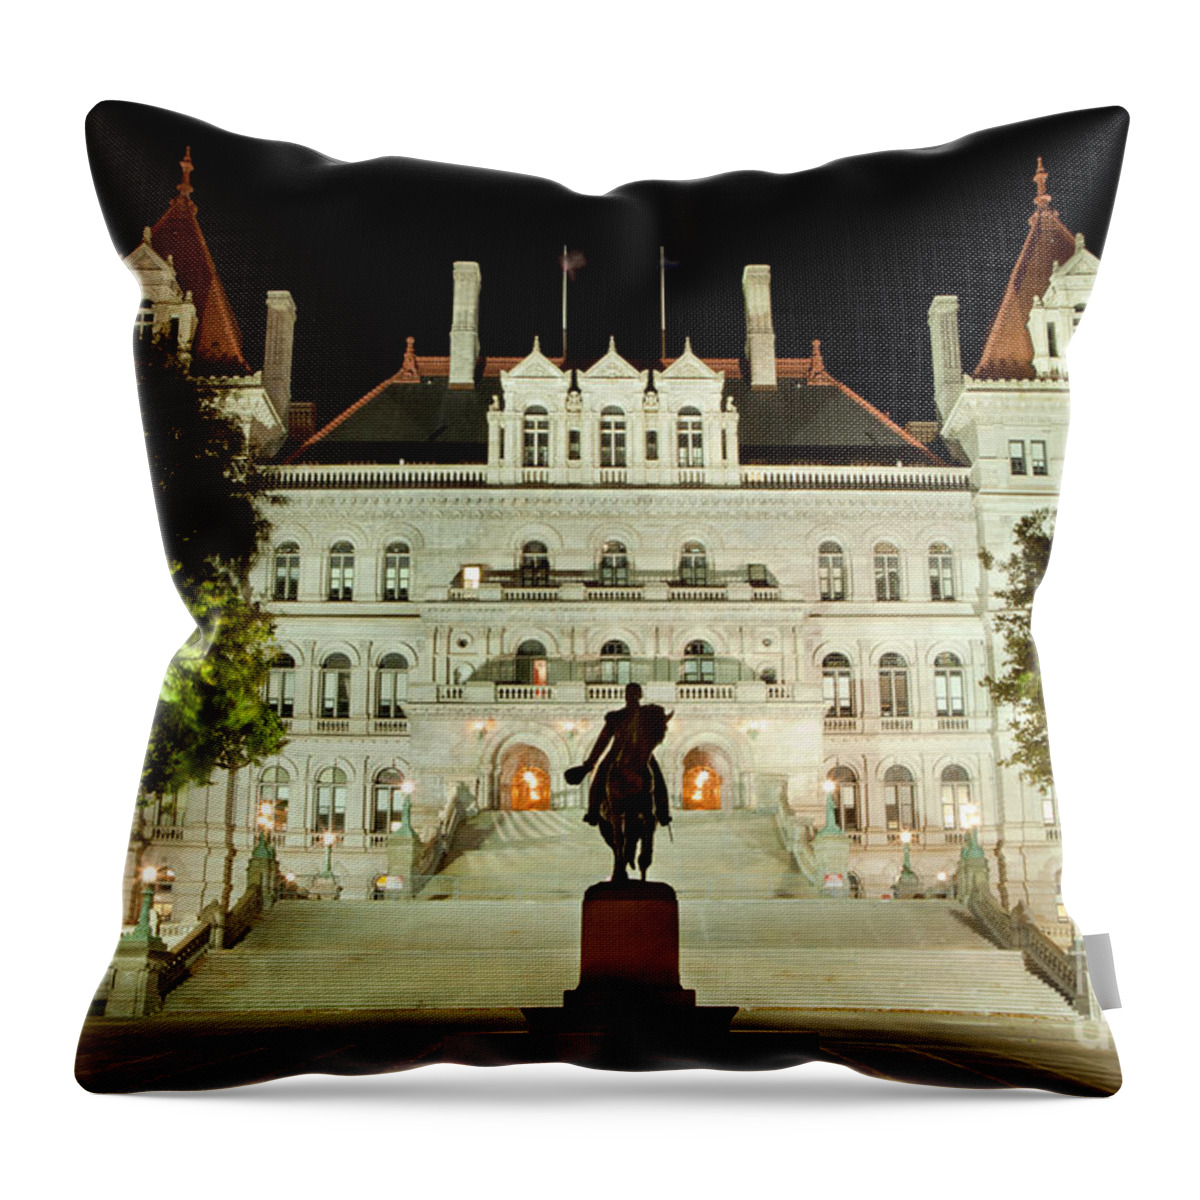 Flowers Throw Pillow featuring the photograph ew York State Capitol in Albany #1 by Anthony Totah